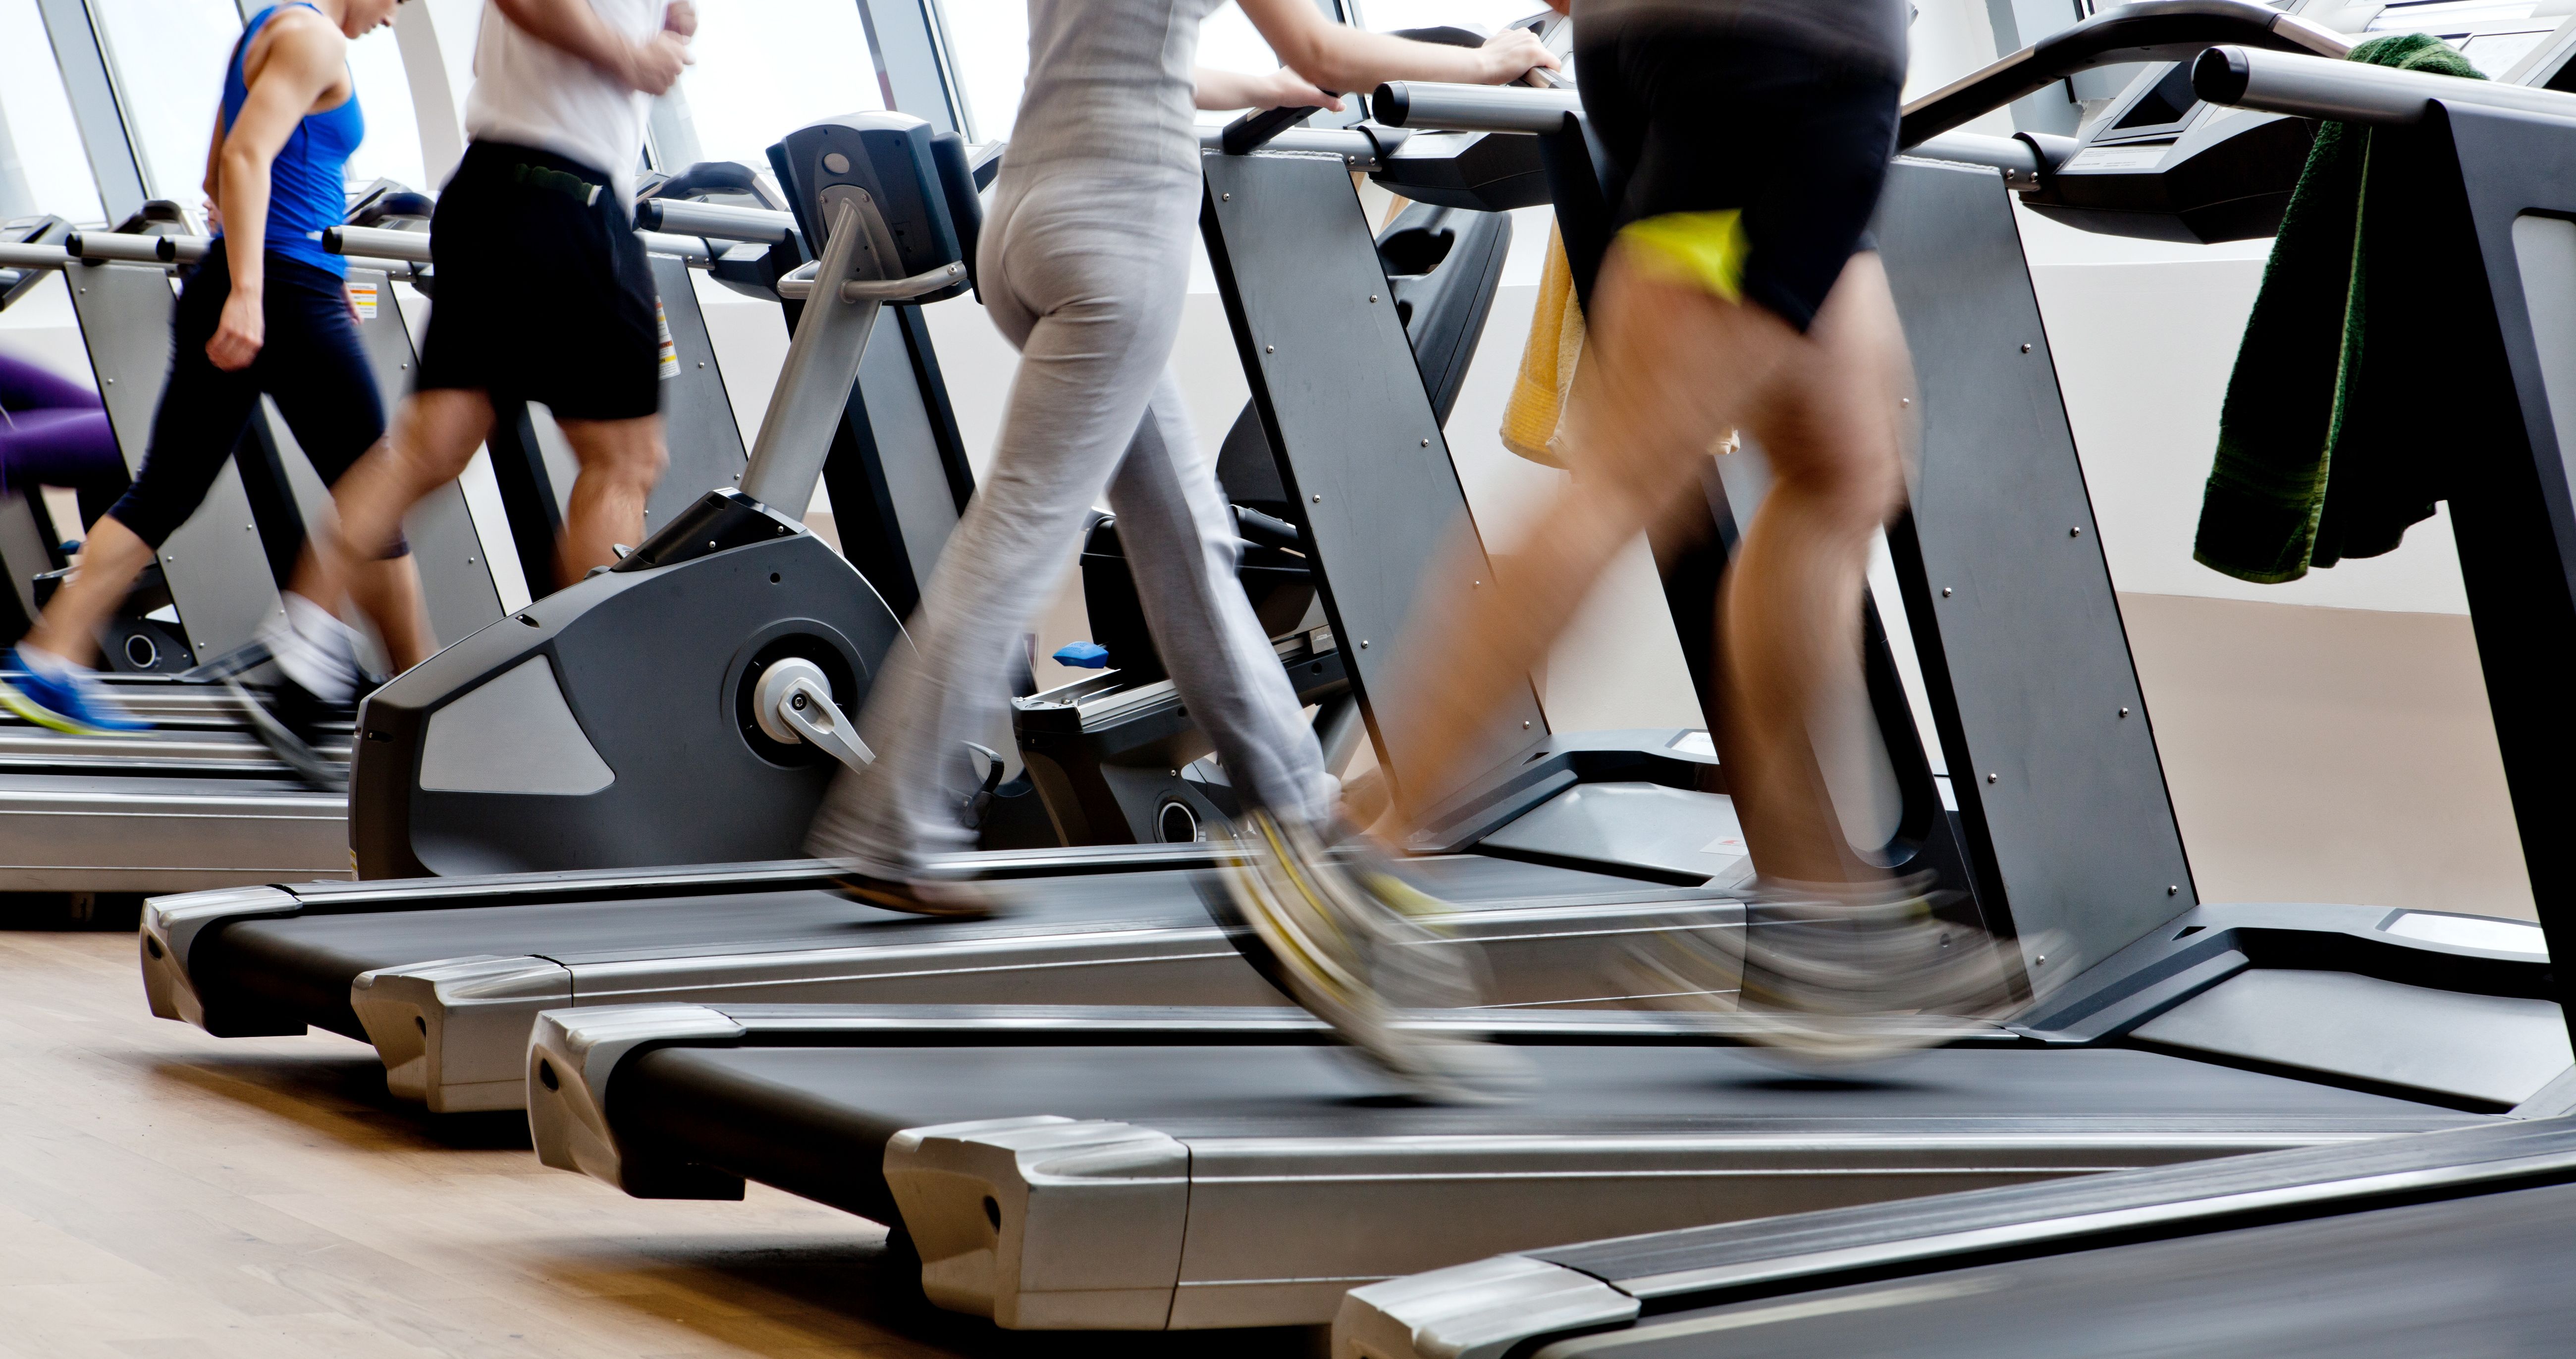 High blood sugar may blunt benefits of aerobic exercise